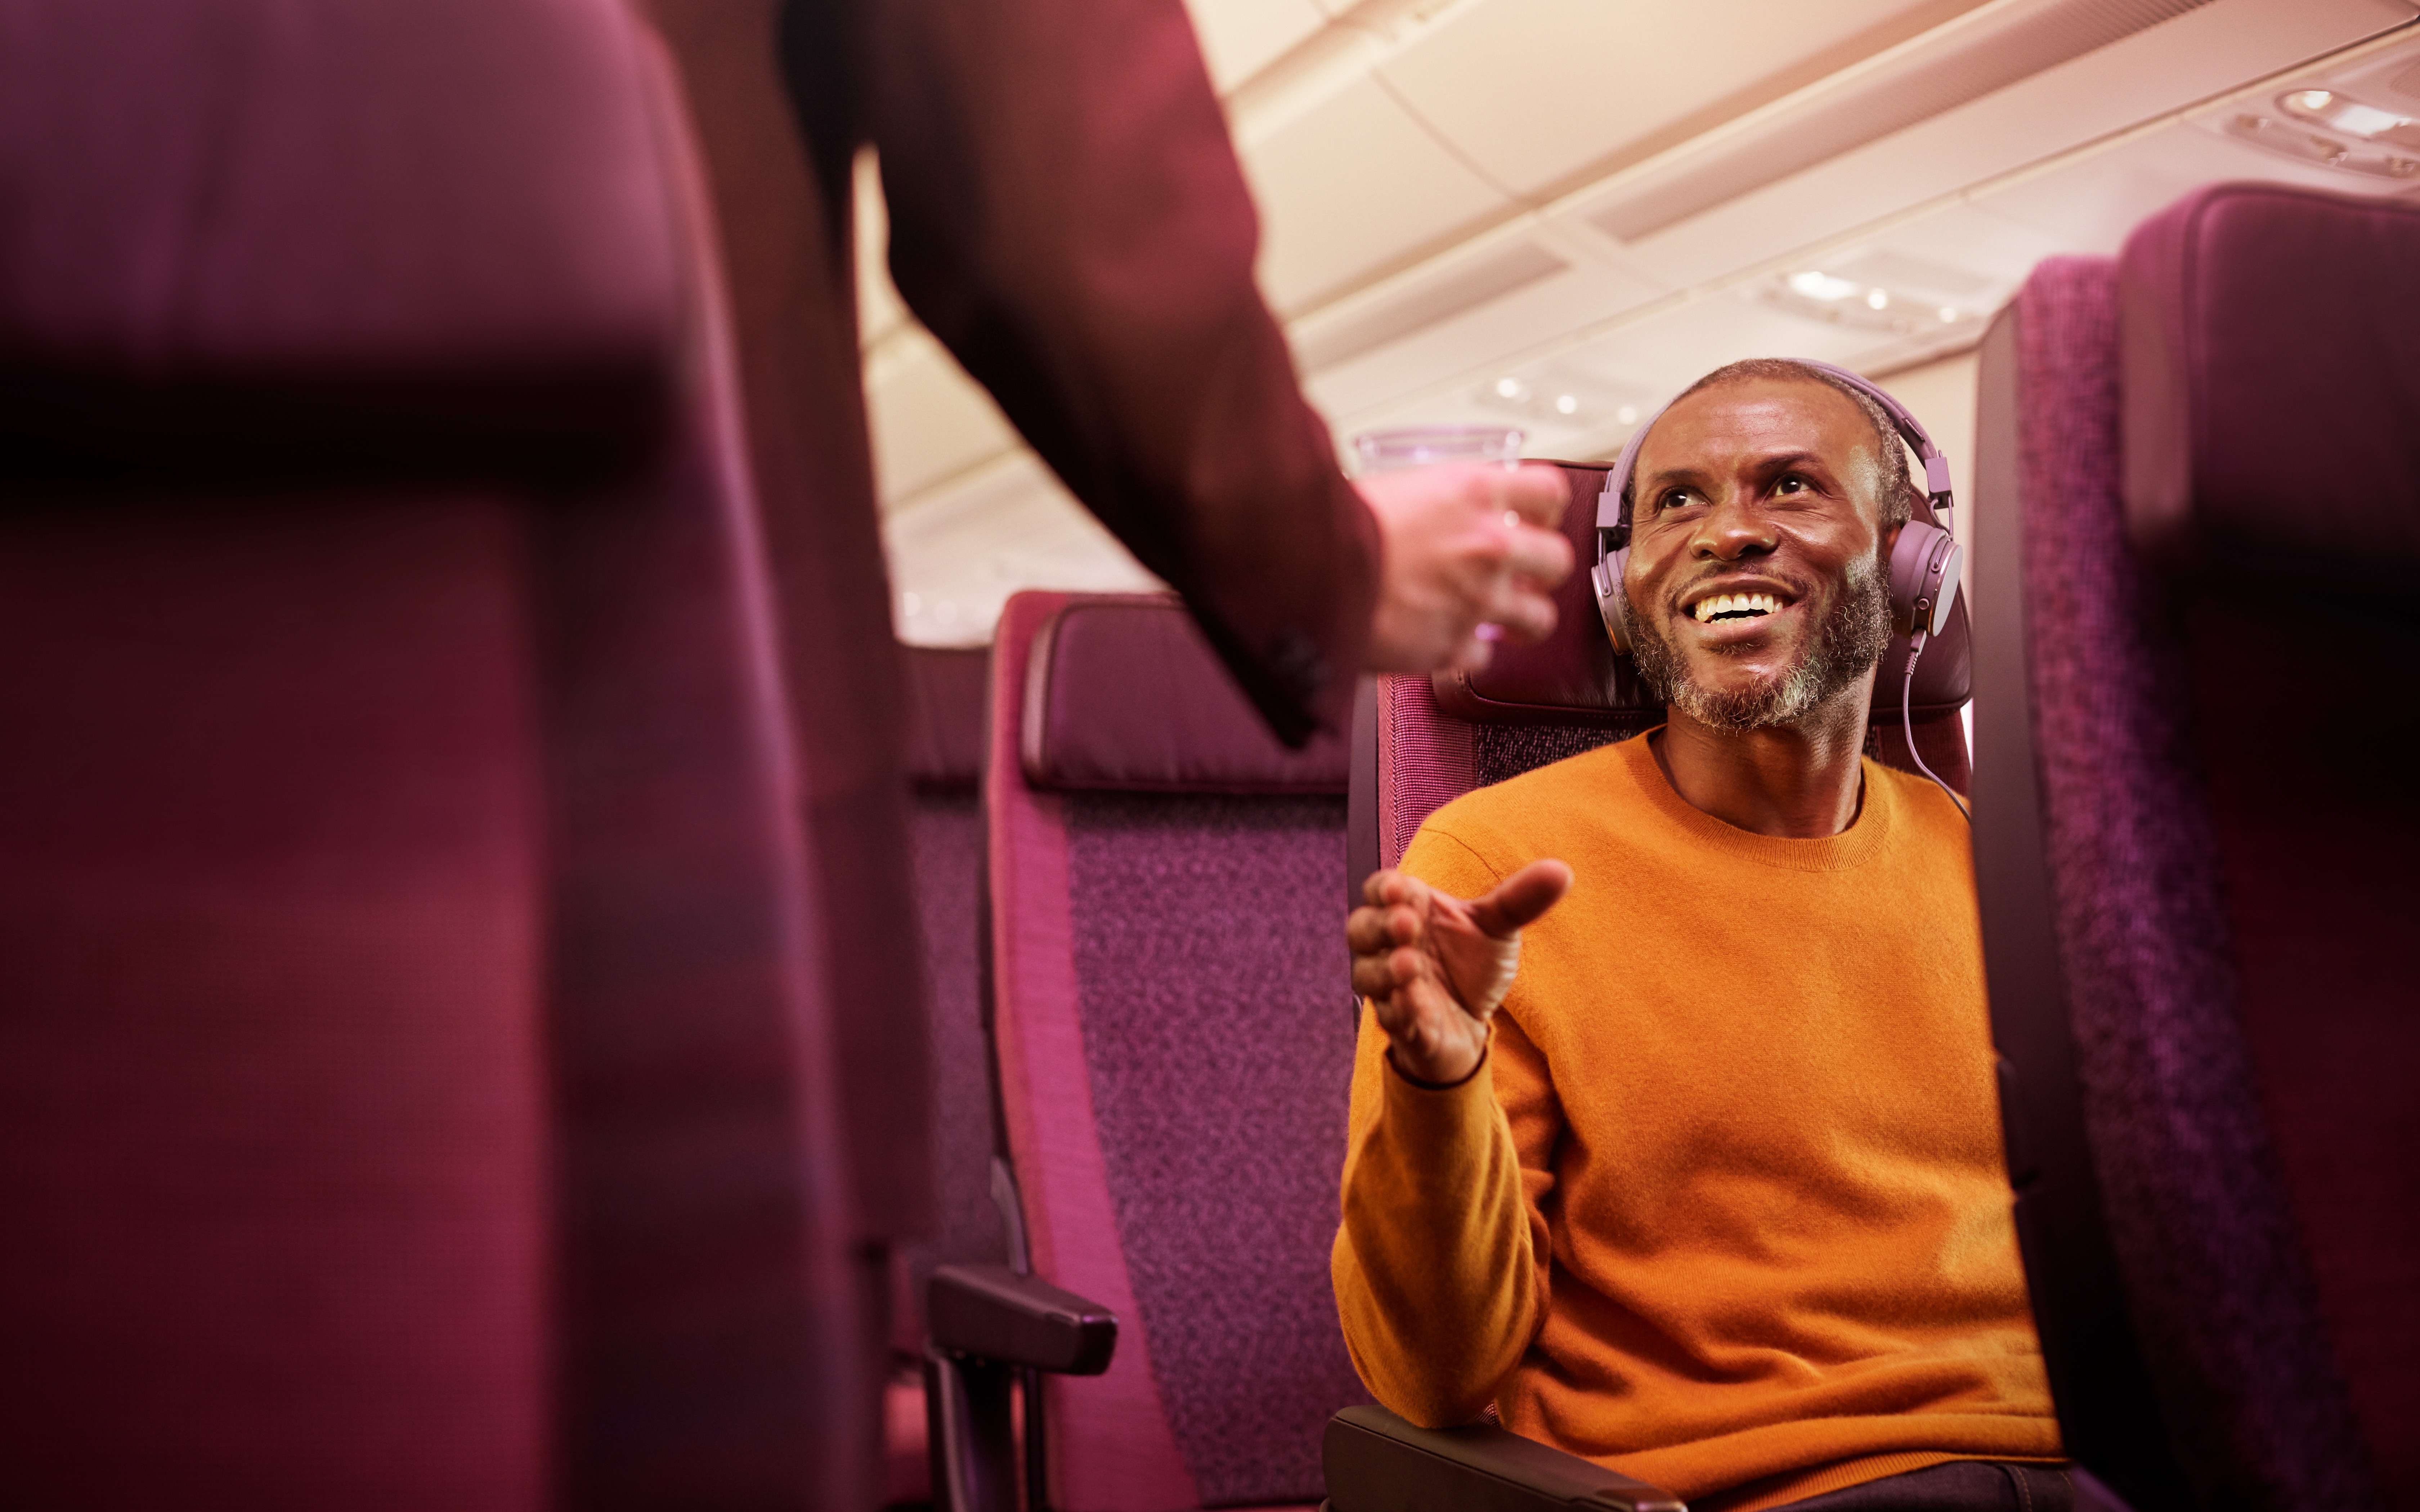 Image of a man receiving a drink in an Economy Class seat of a Virgin Atlantic flight.